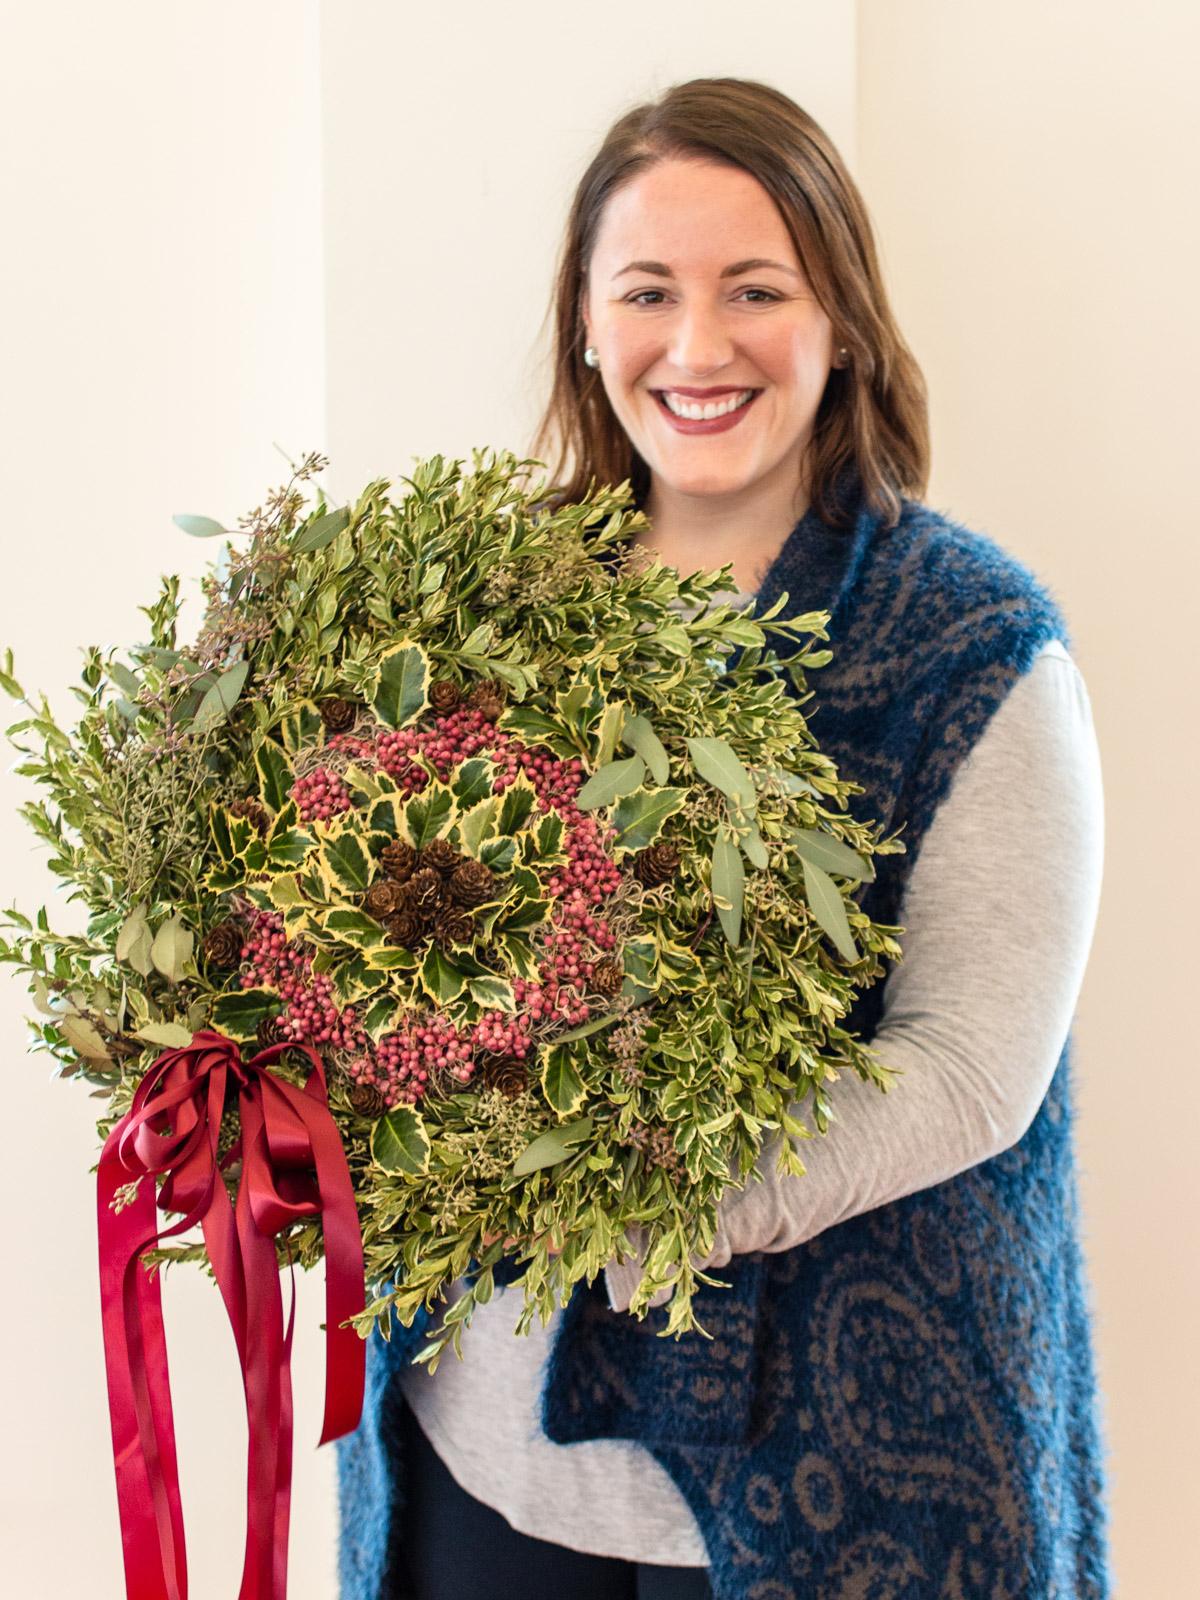 the winner of the DIY holiday garden wreath giveaway